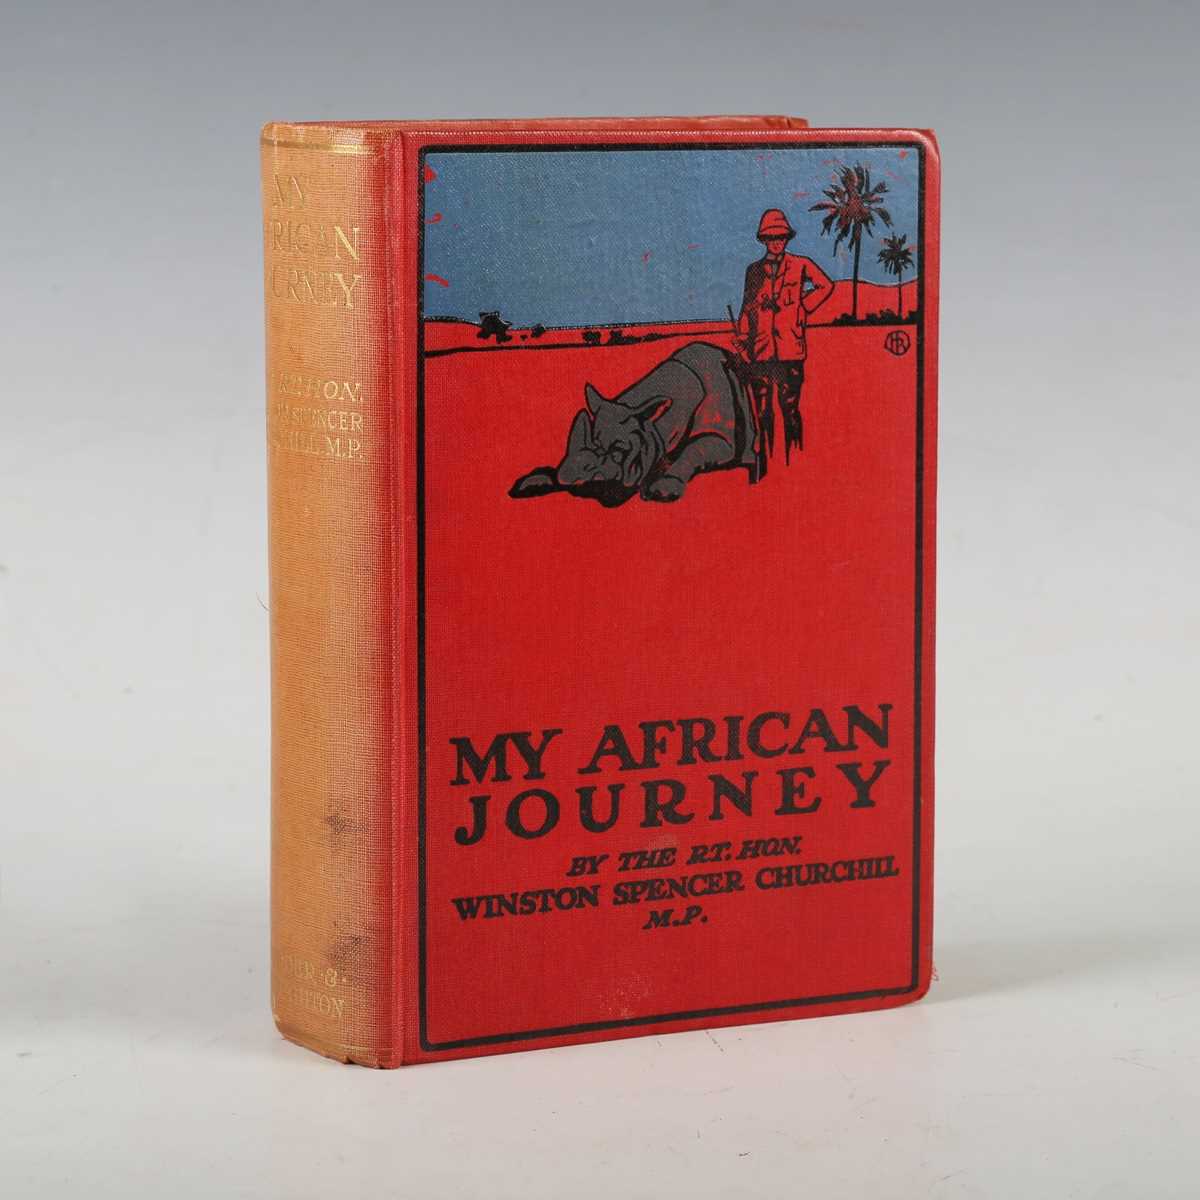 CHURCHILL, Winston S. My African Journey. London: Hodder and Stoughton, 1908. First edition, 8vo (